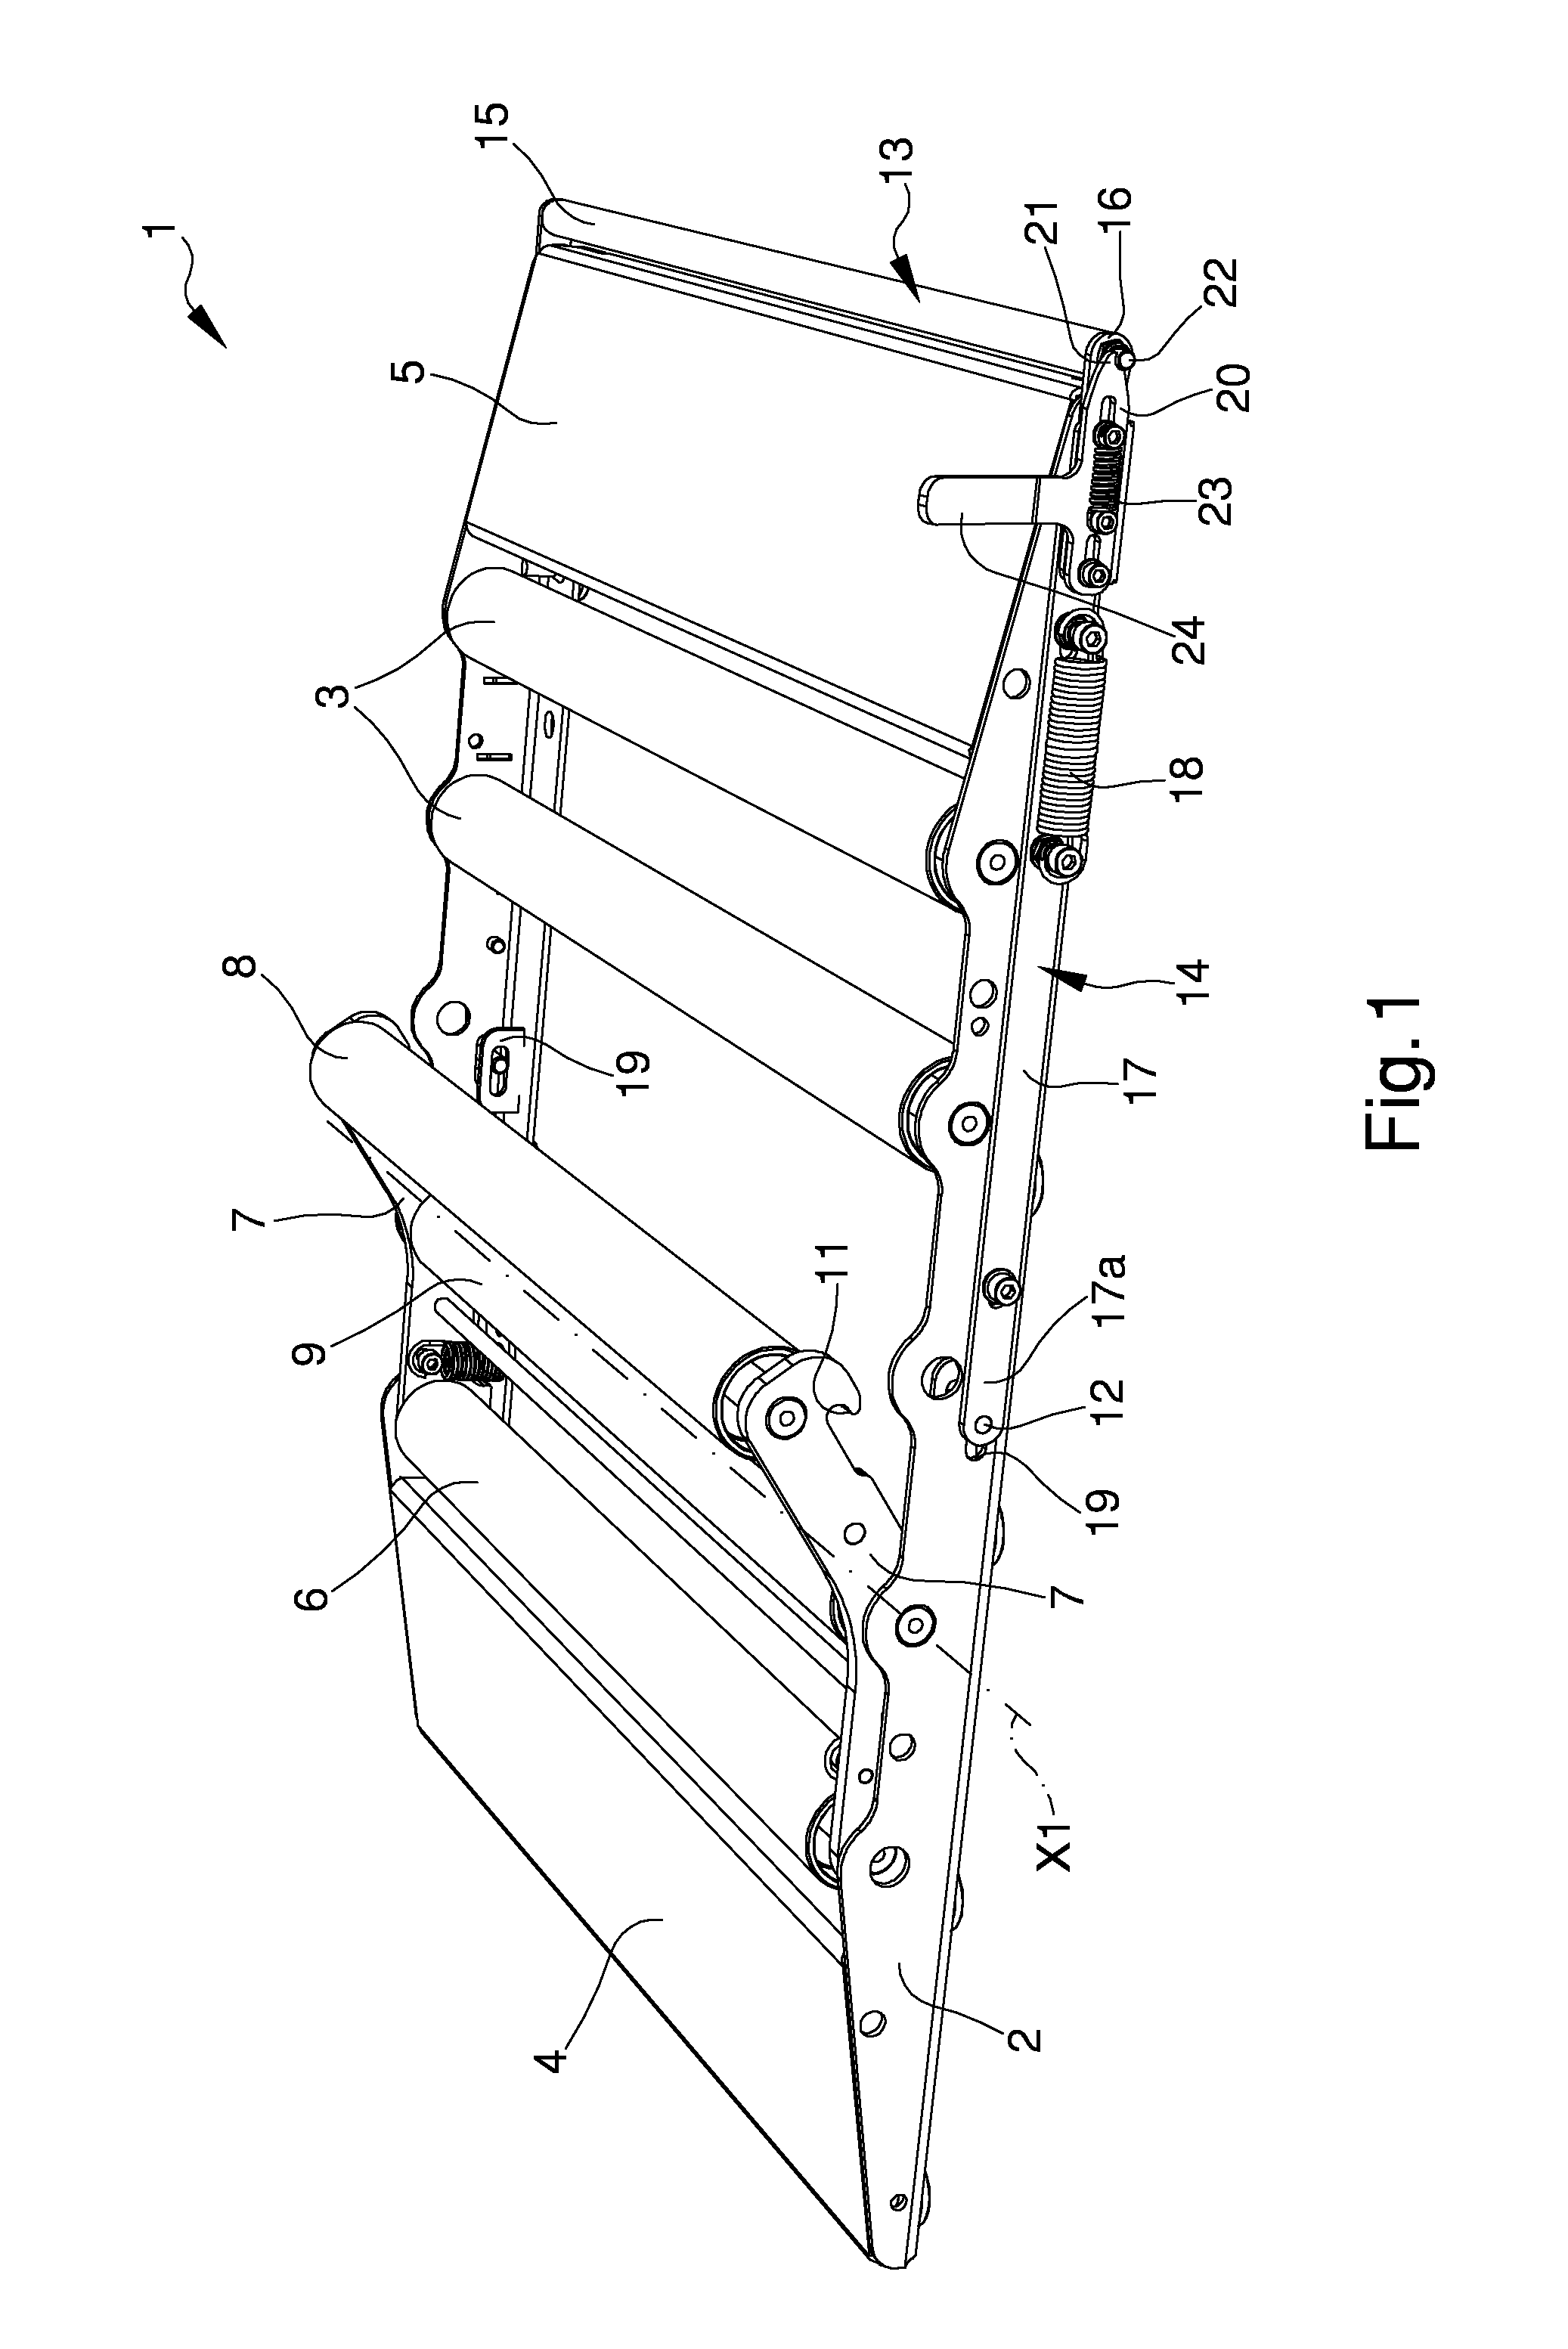 Equipment for test stands of the braking system of vehicles, in particular for four-wheel drive vehicles